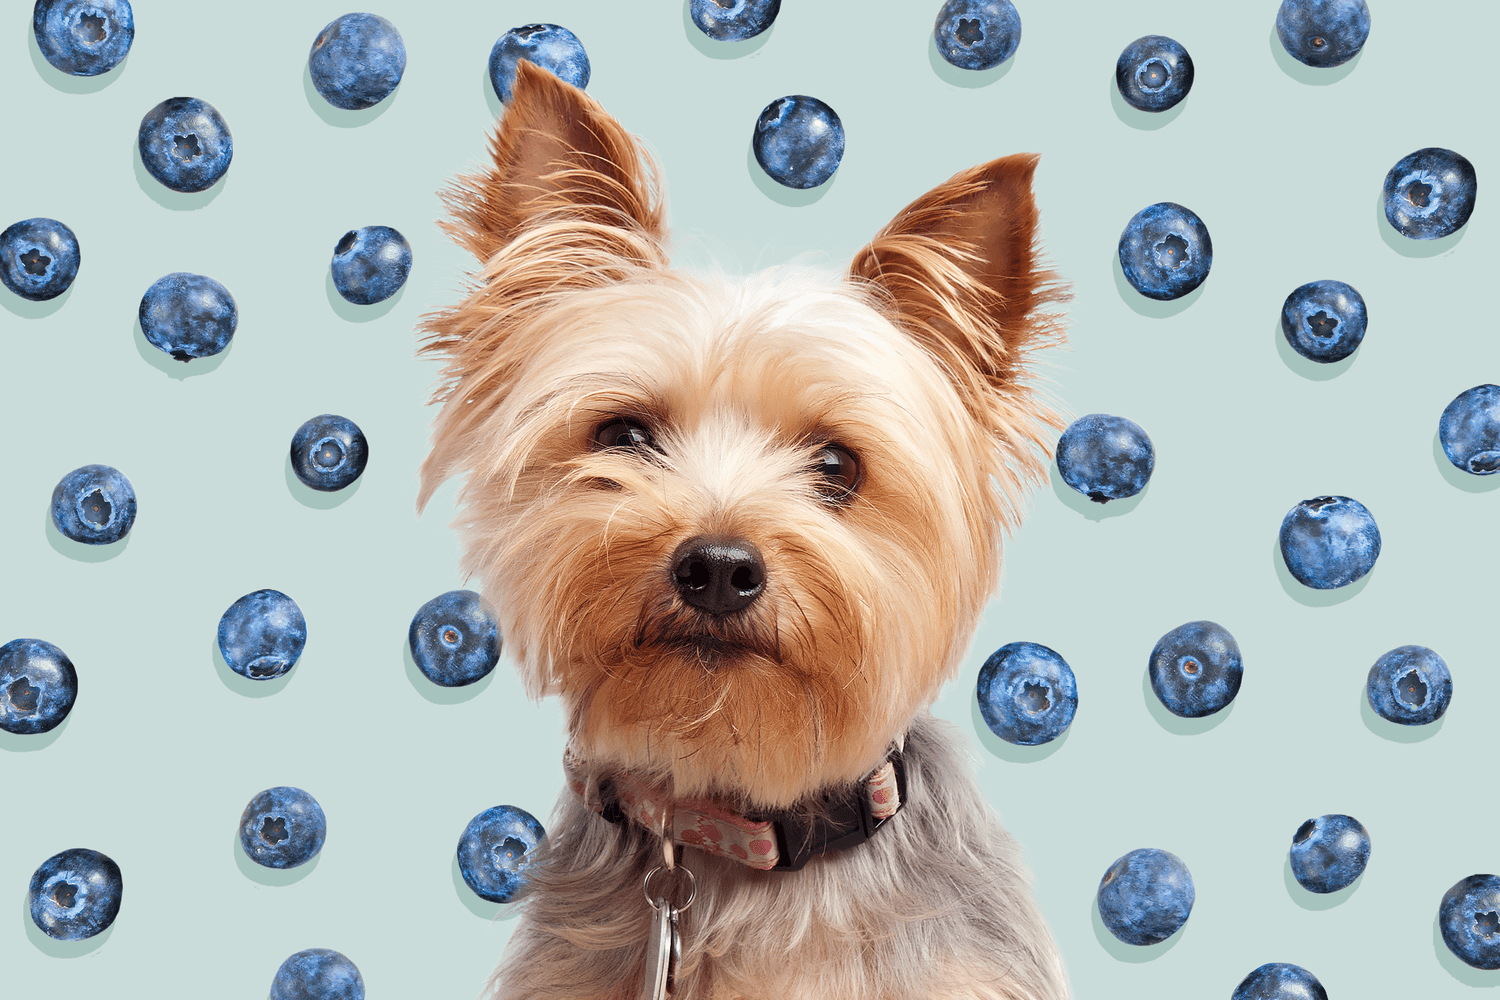 Can Dogs Eat Blueberries? Here's What To Know About This Healthy Canine Snack